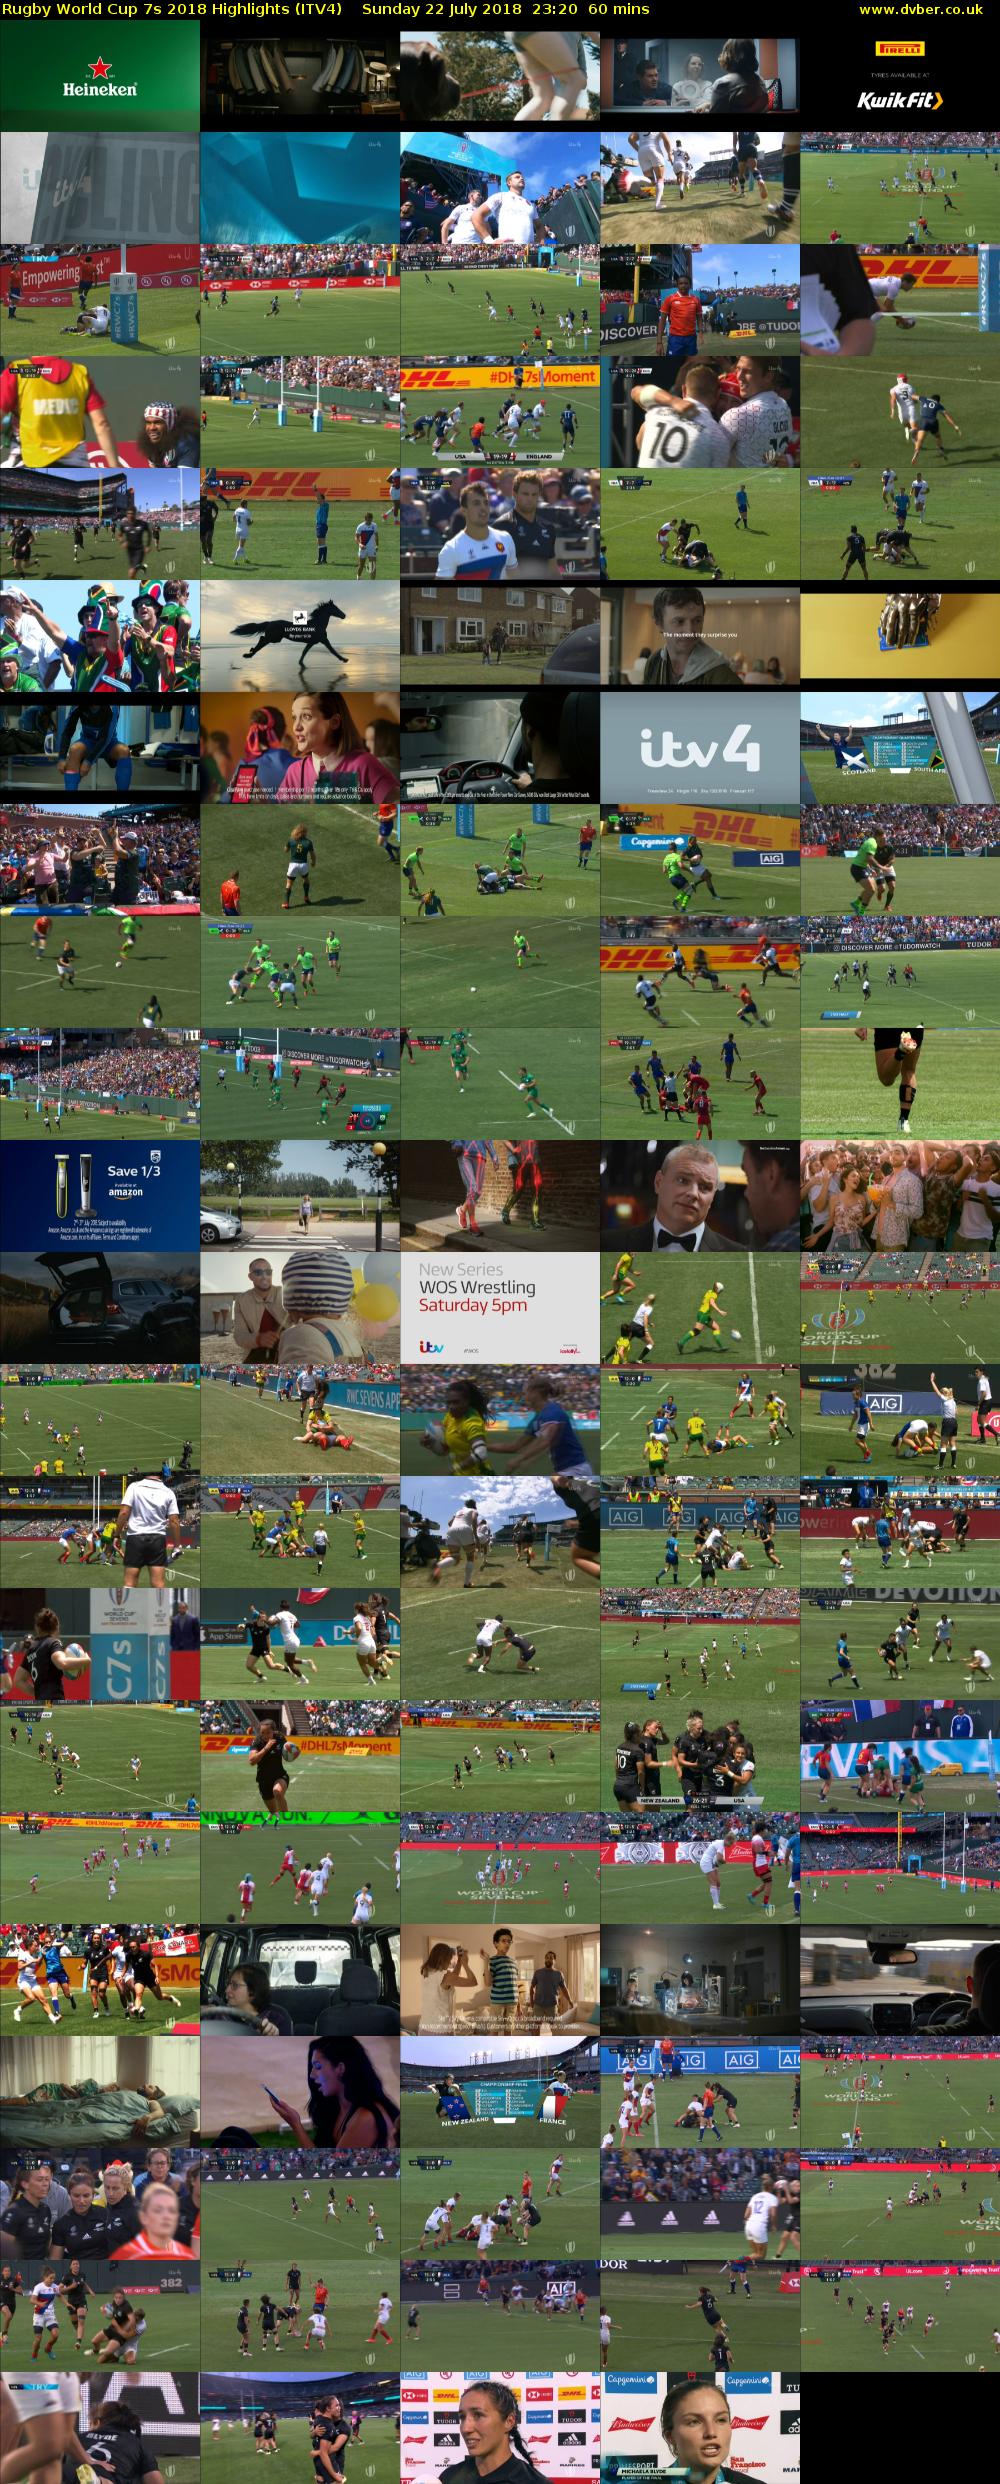 Rugby World Cup 7s 2018 Highlights (ITV4) Sunday 22 July 2018 23:20 - 00:20